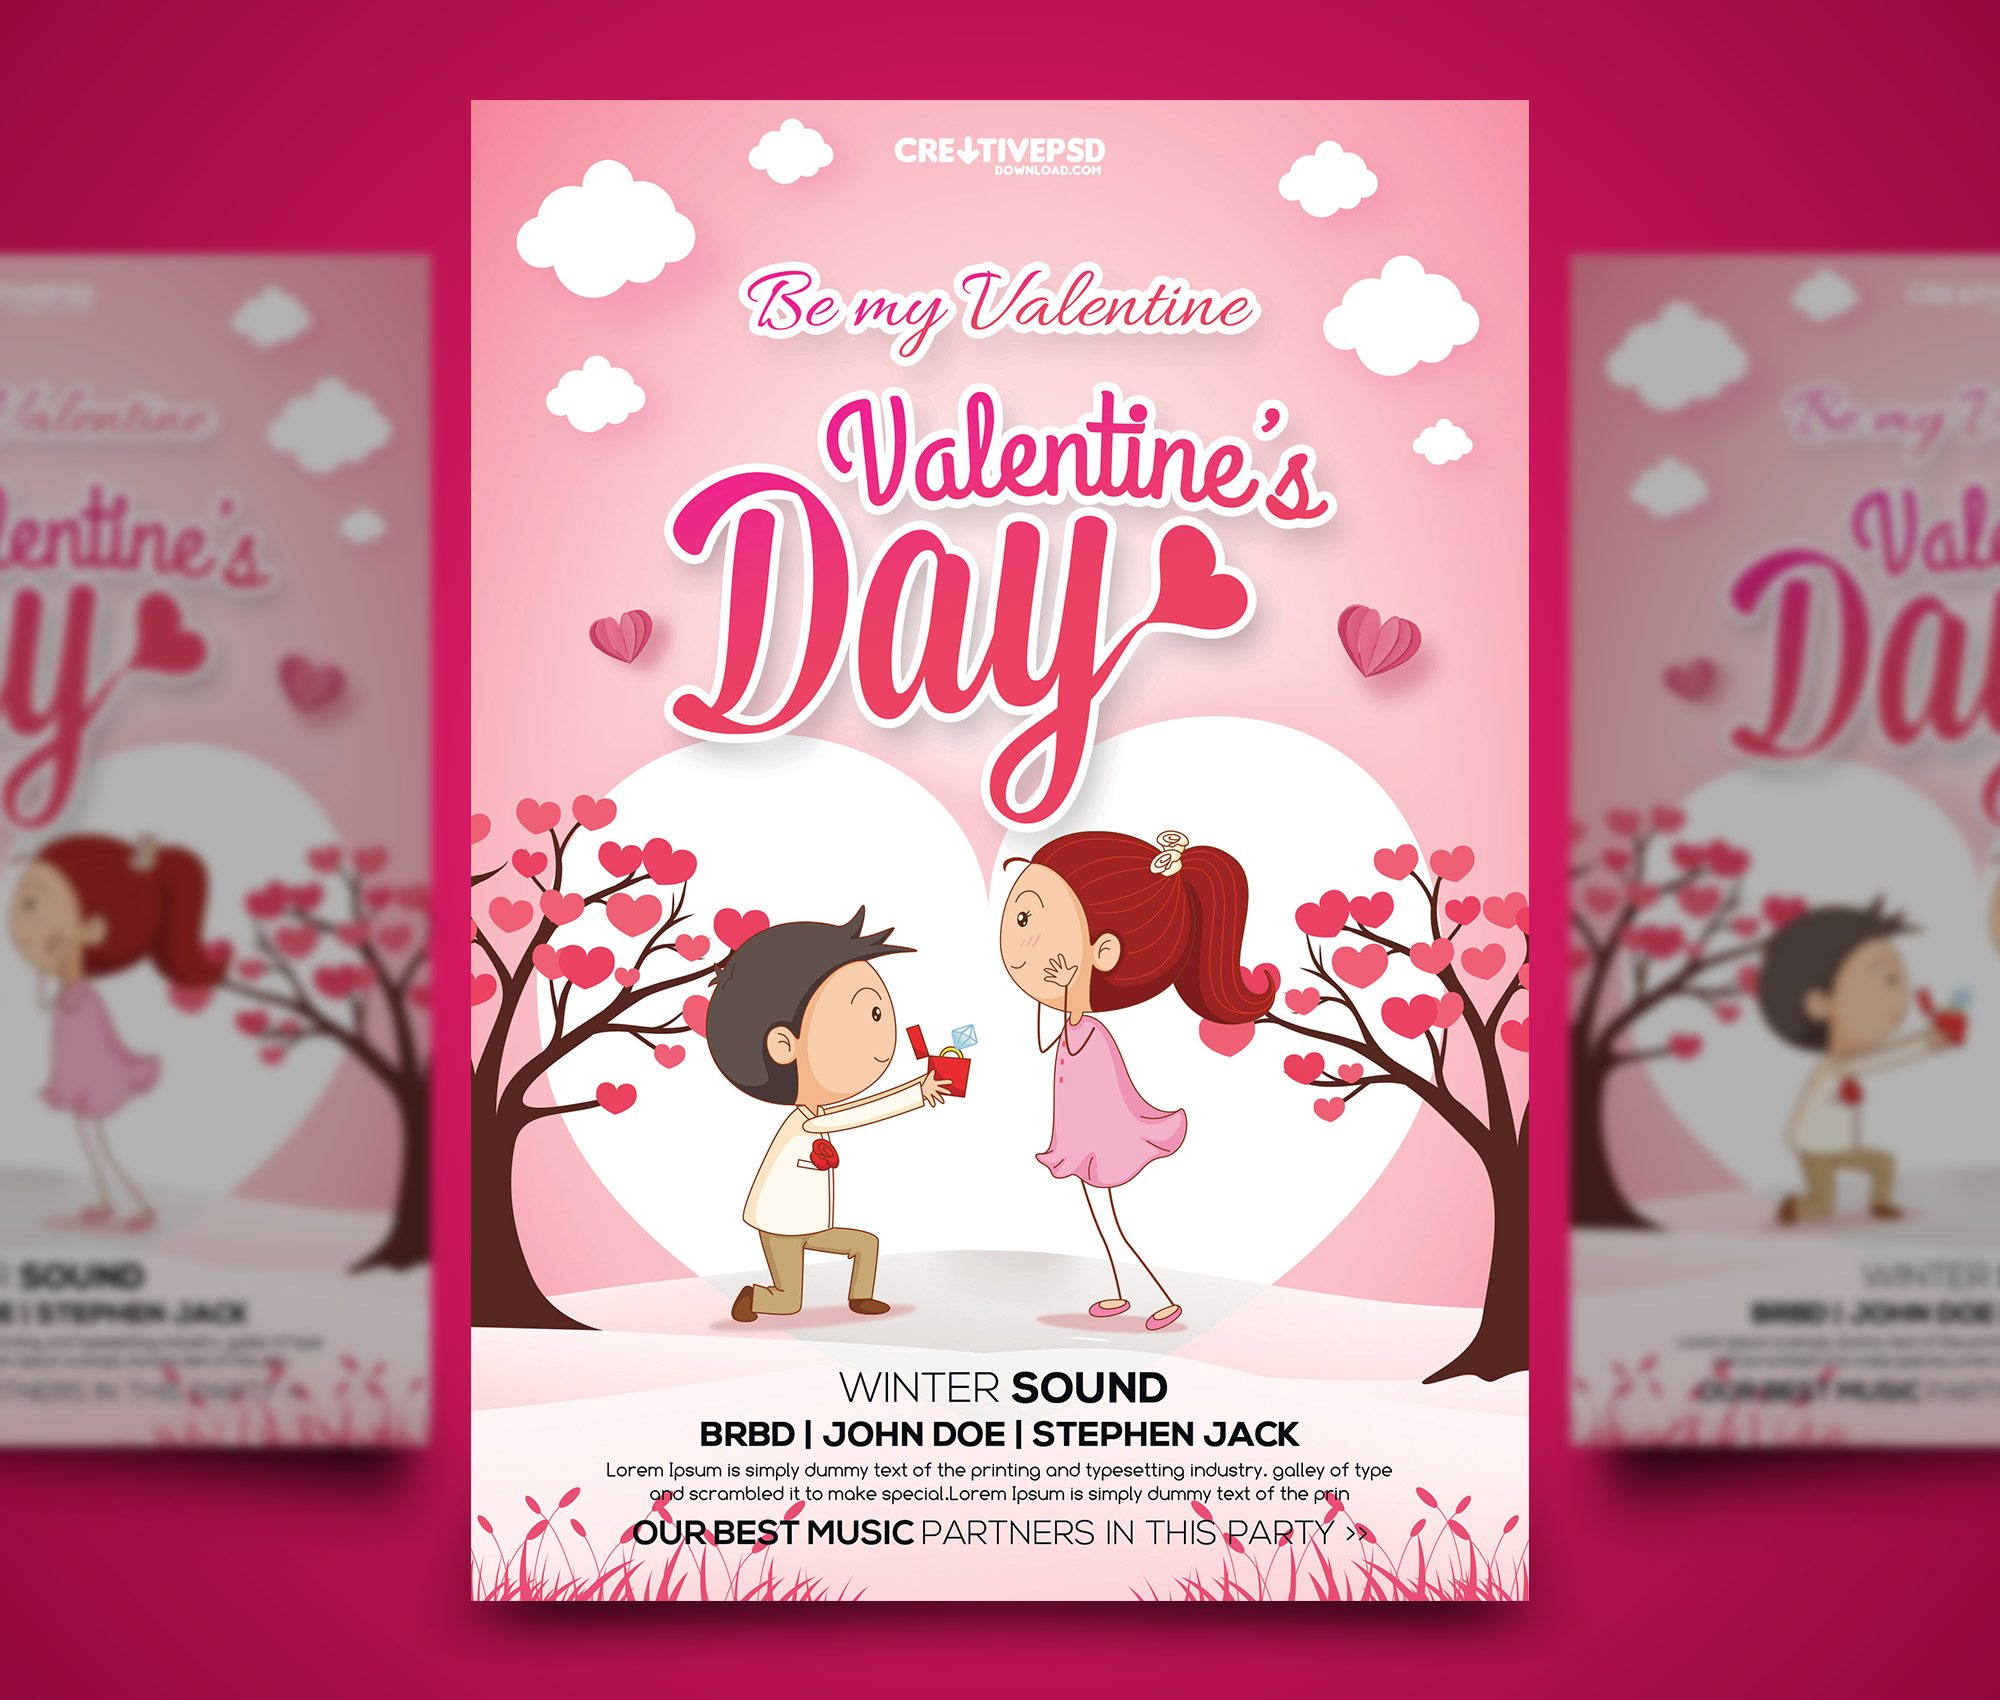 Valentines Day Free Flyer PSD With Service Industry Night Flyer Template Throughout Service Industry Night Flyer Template